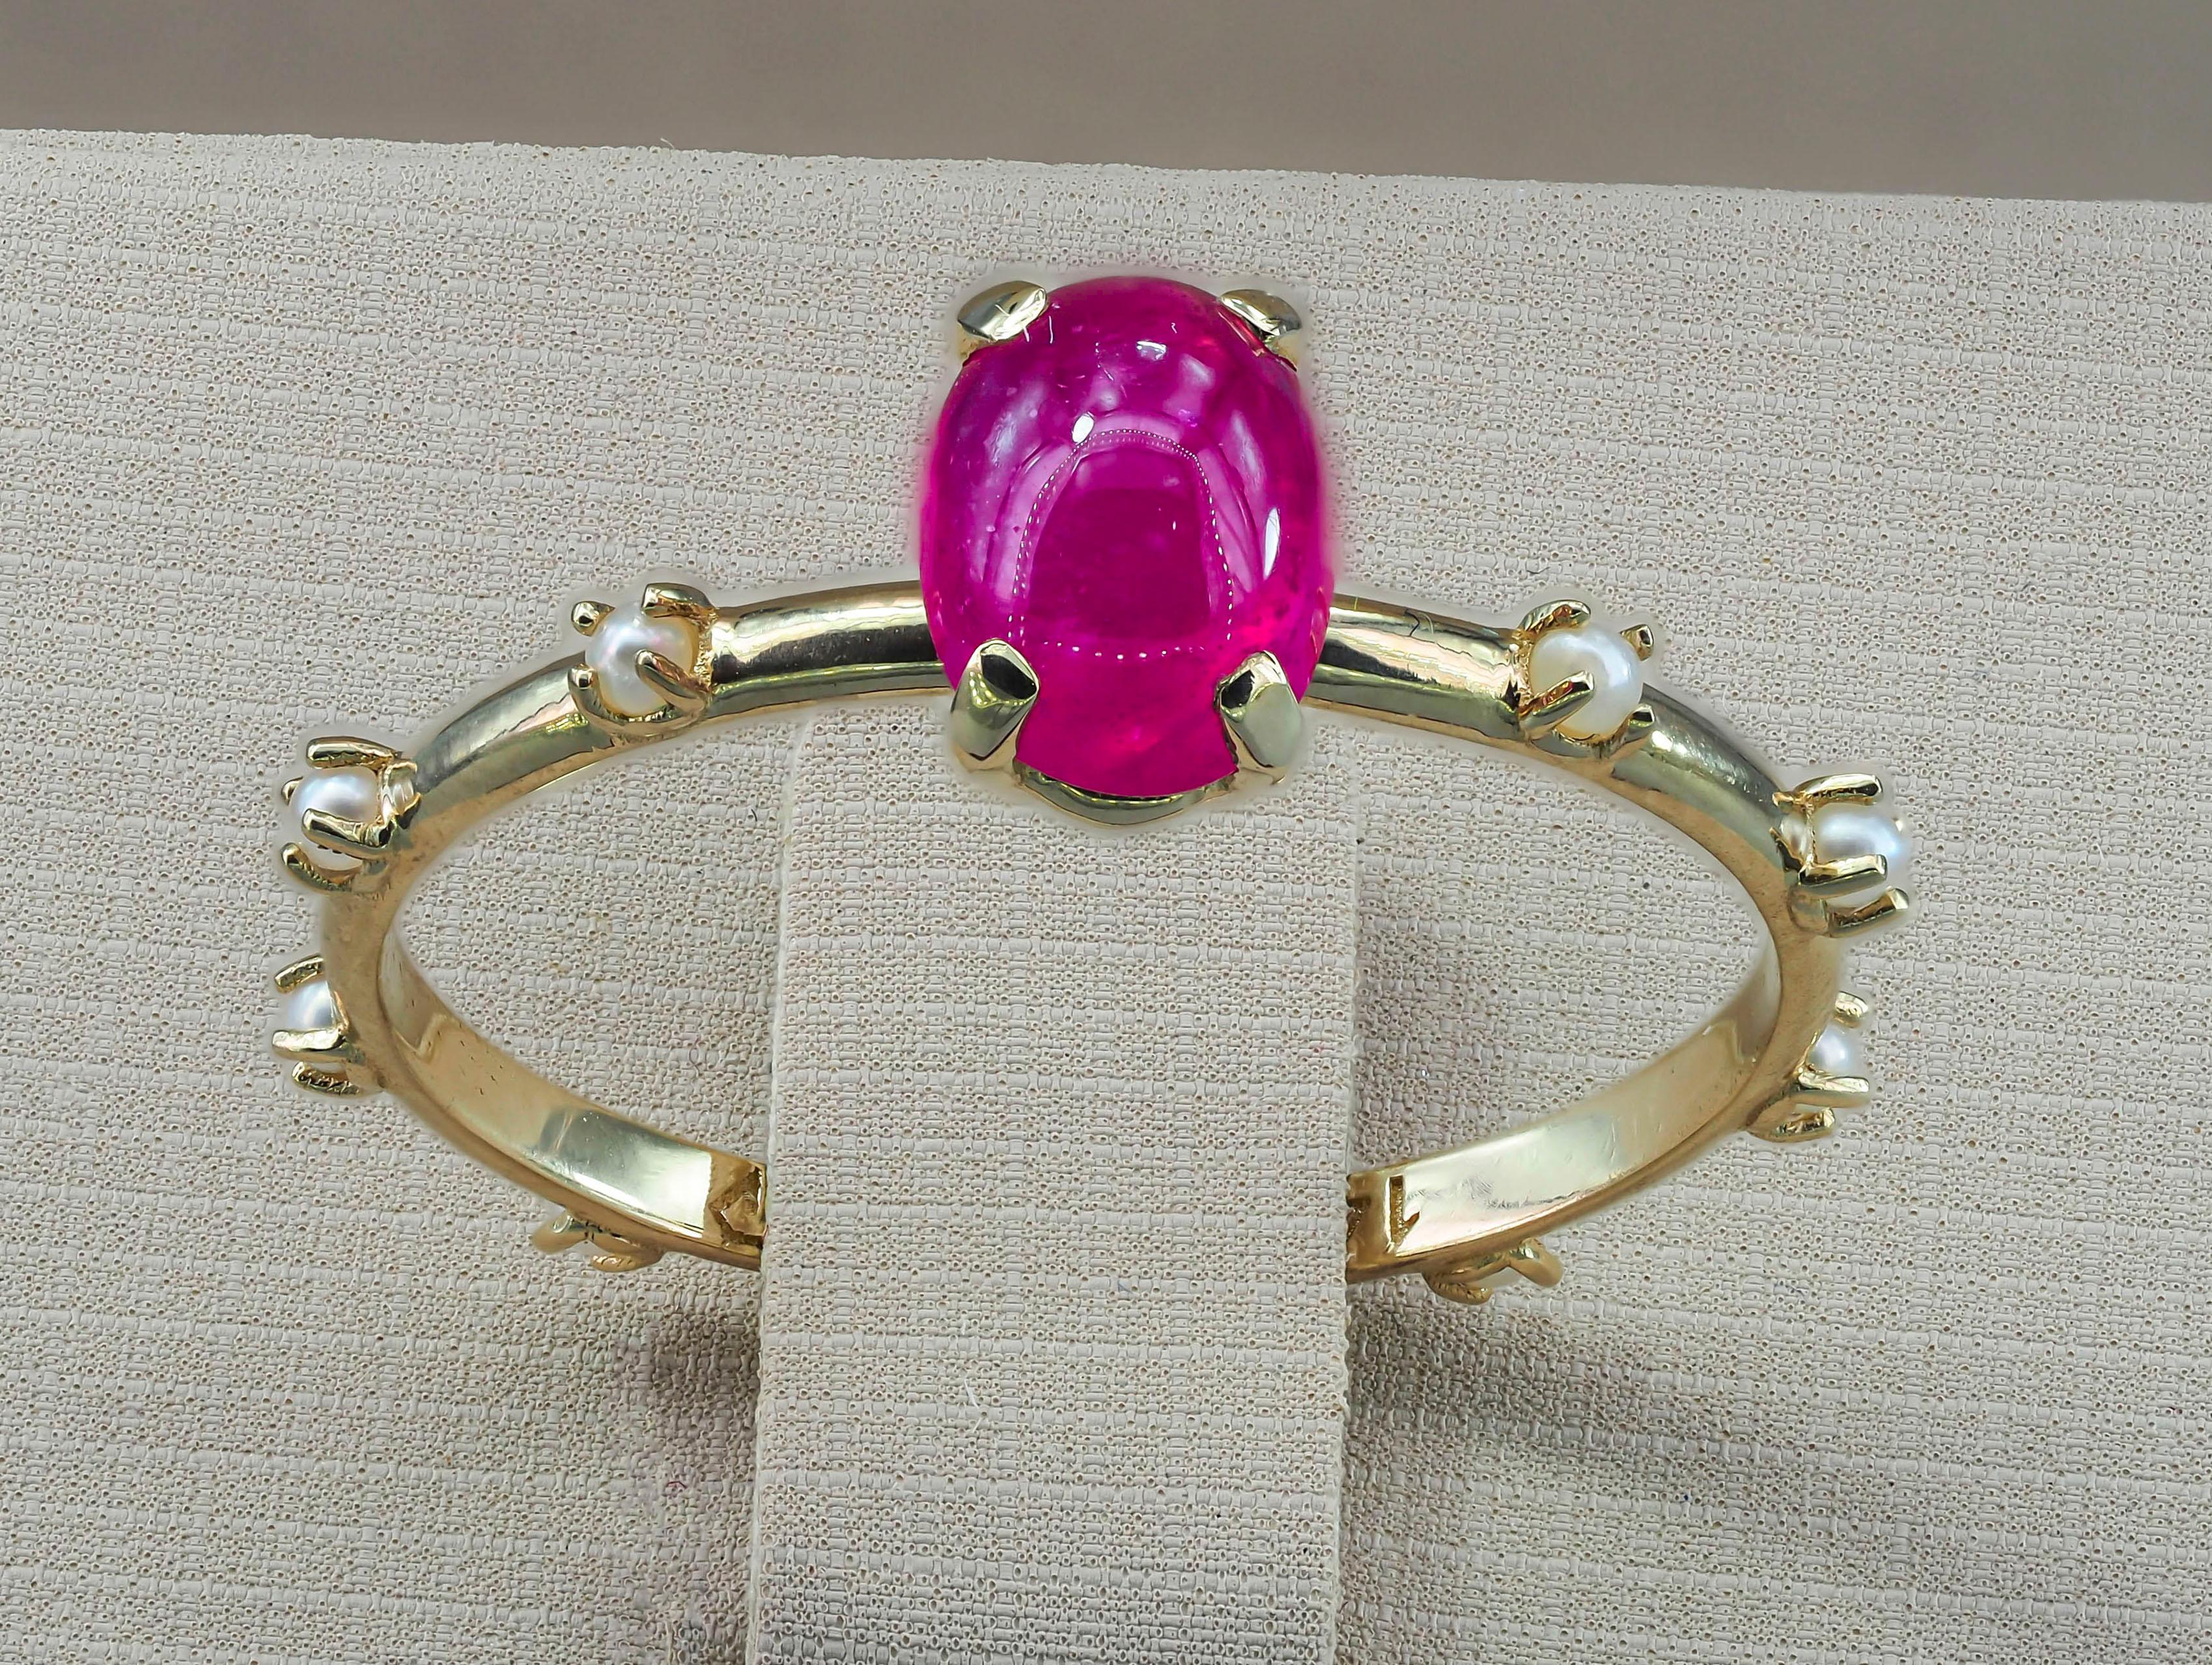 Ruby and pearls ring in 14k gold. 
Cabochon ruby ring. Stacking ring. Ruby promise ring. July birthstone ring. Valentine's jewelry.

Metal: 14k gold
Weight: 1.4 g. depends from size.

Set with ruby, color - violetish red
Oval cabochon cut, approx